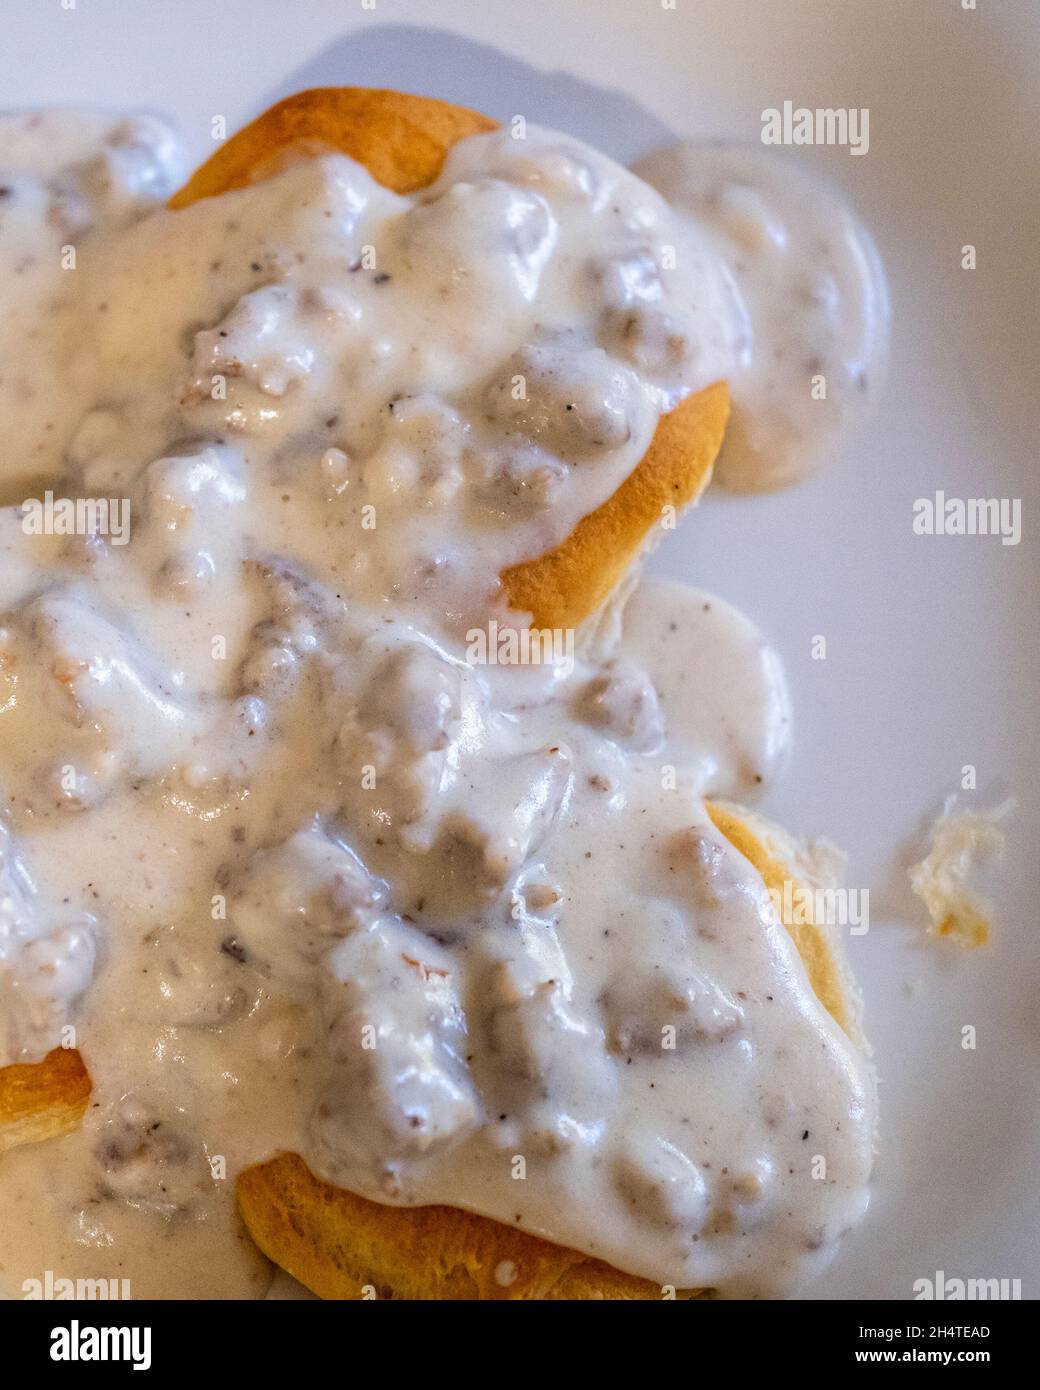 Sausage peppered milk gravy over biscuits on a white plate. Stock Photo